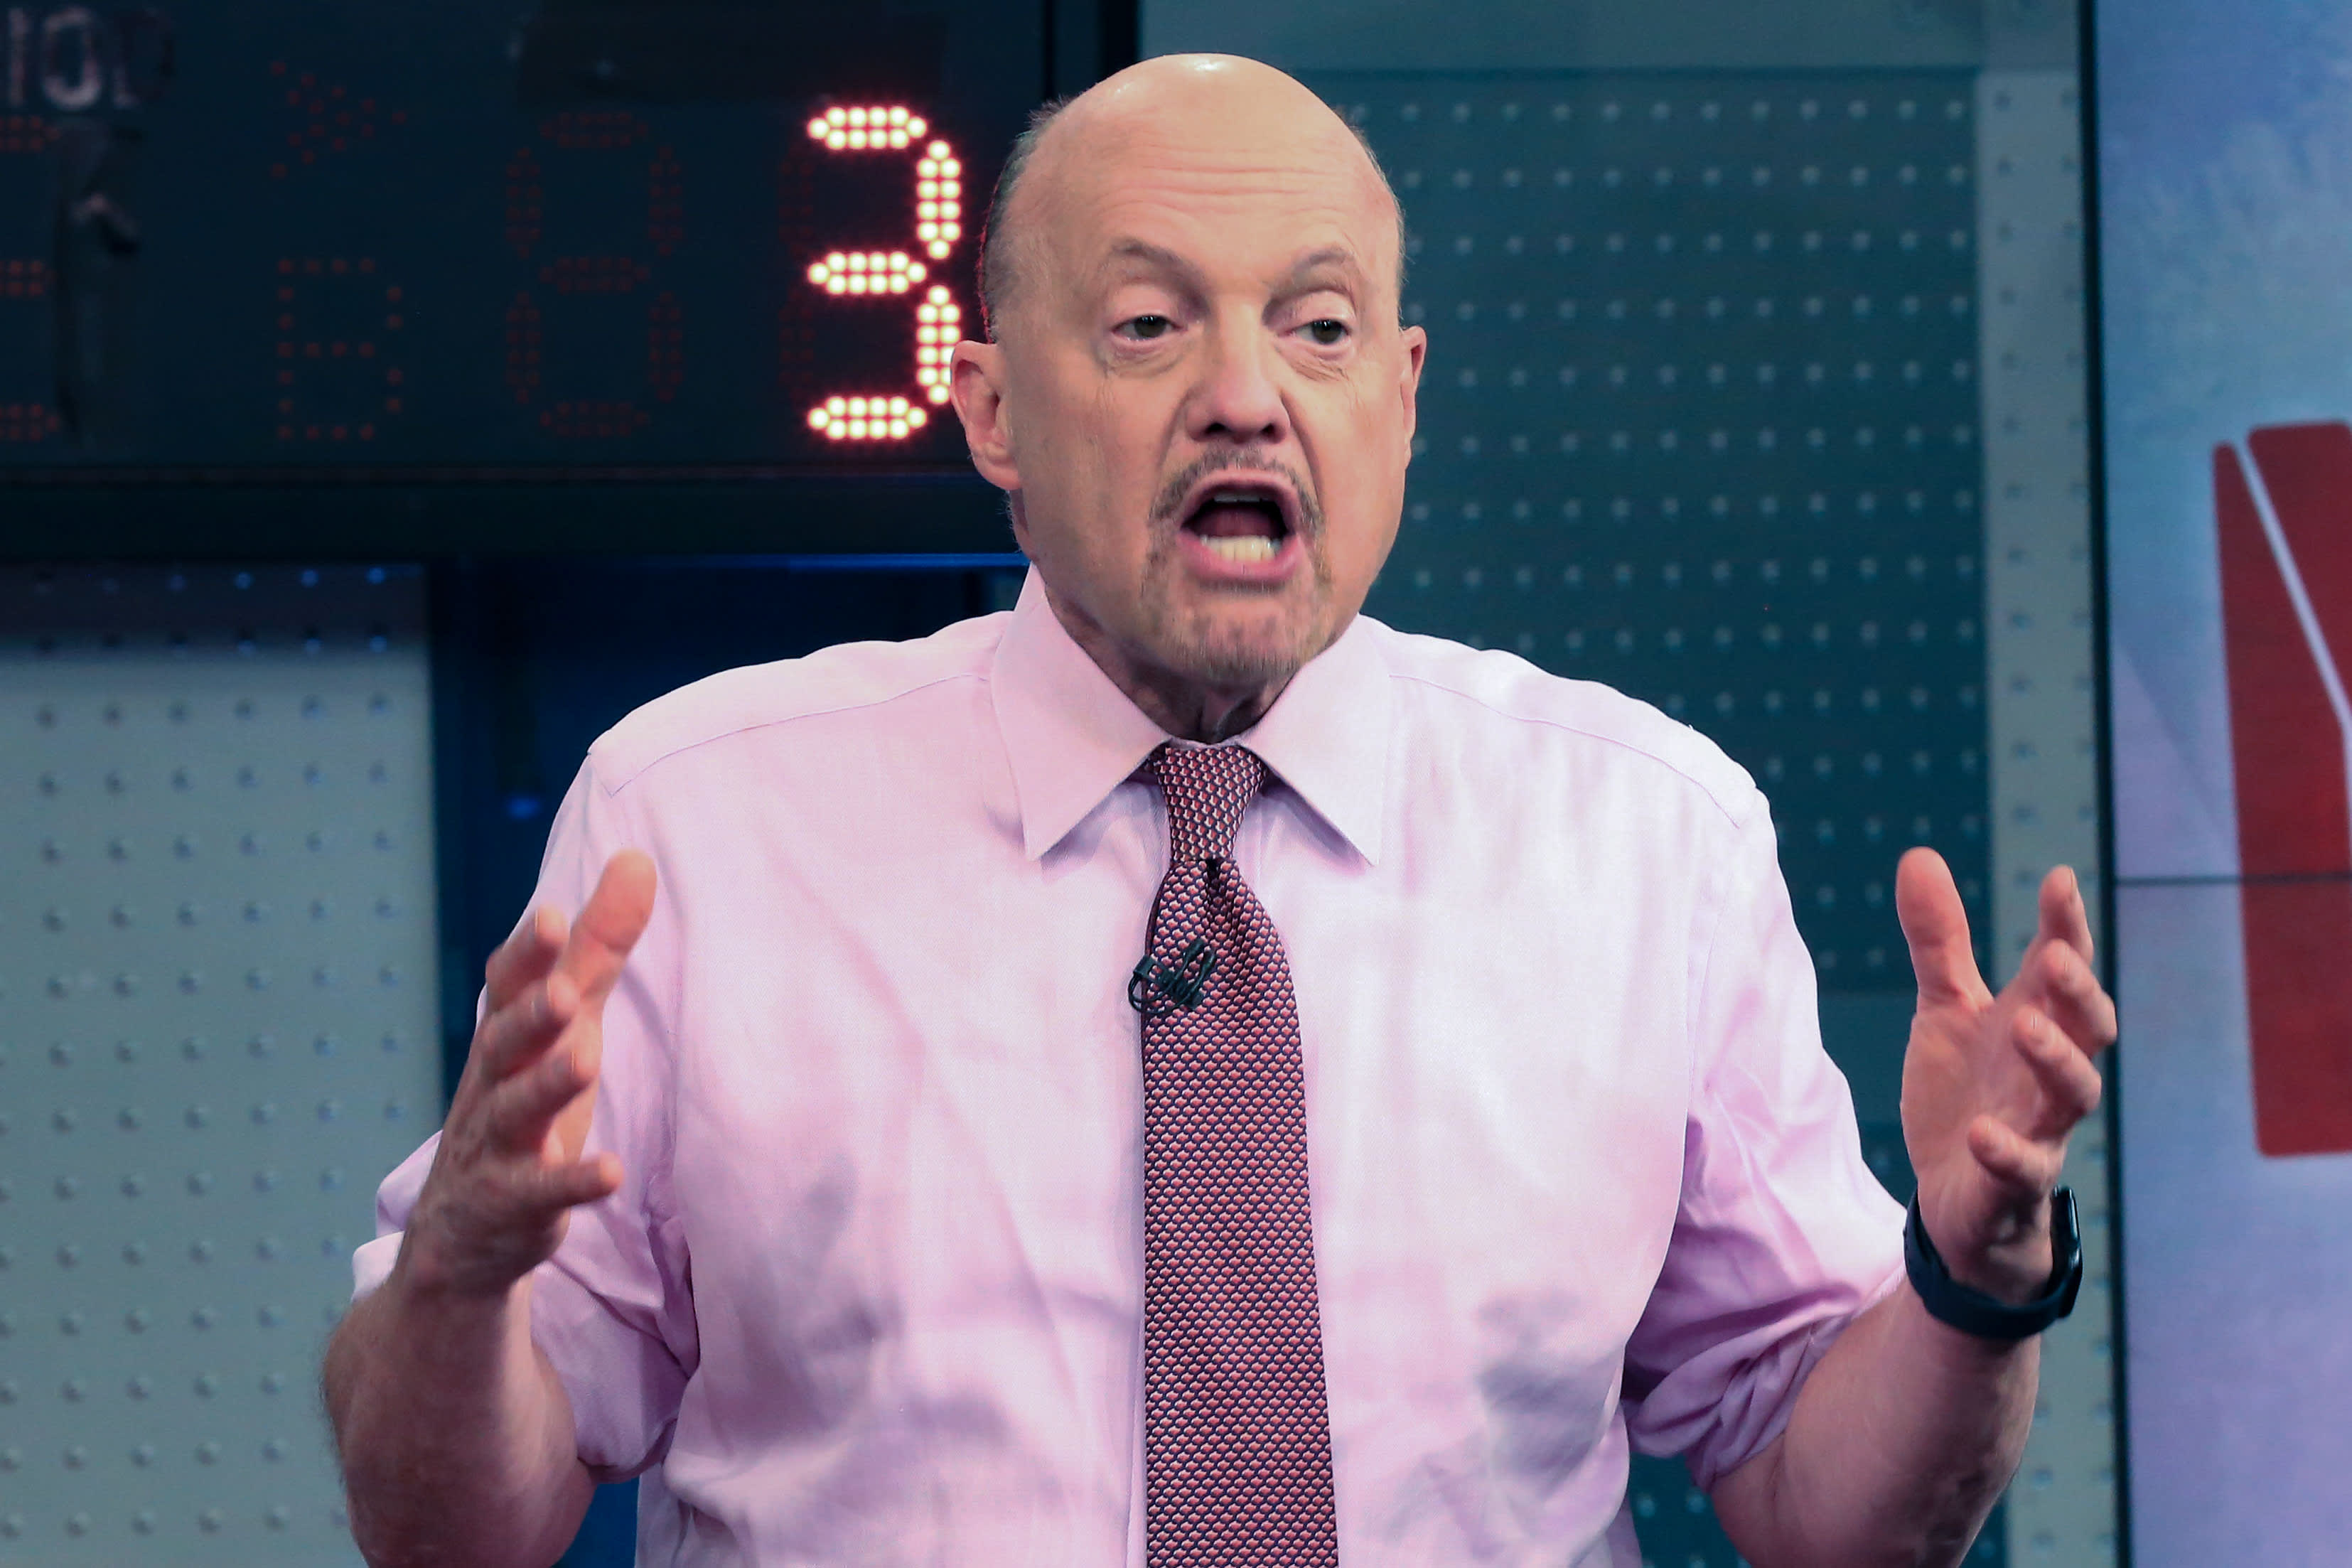 As the market starts to cool, Cramer says, stay bullish